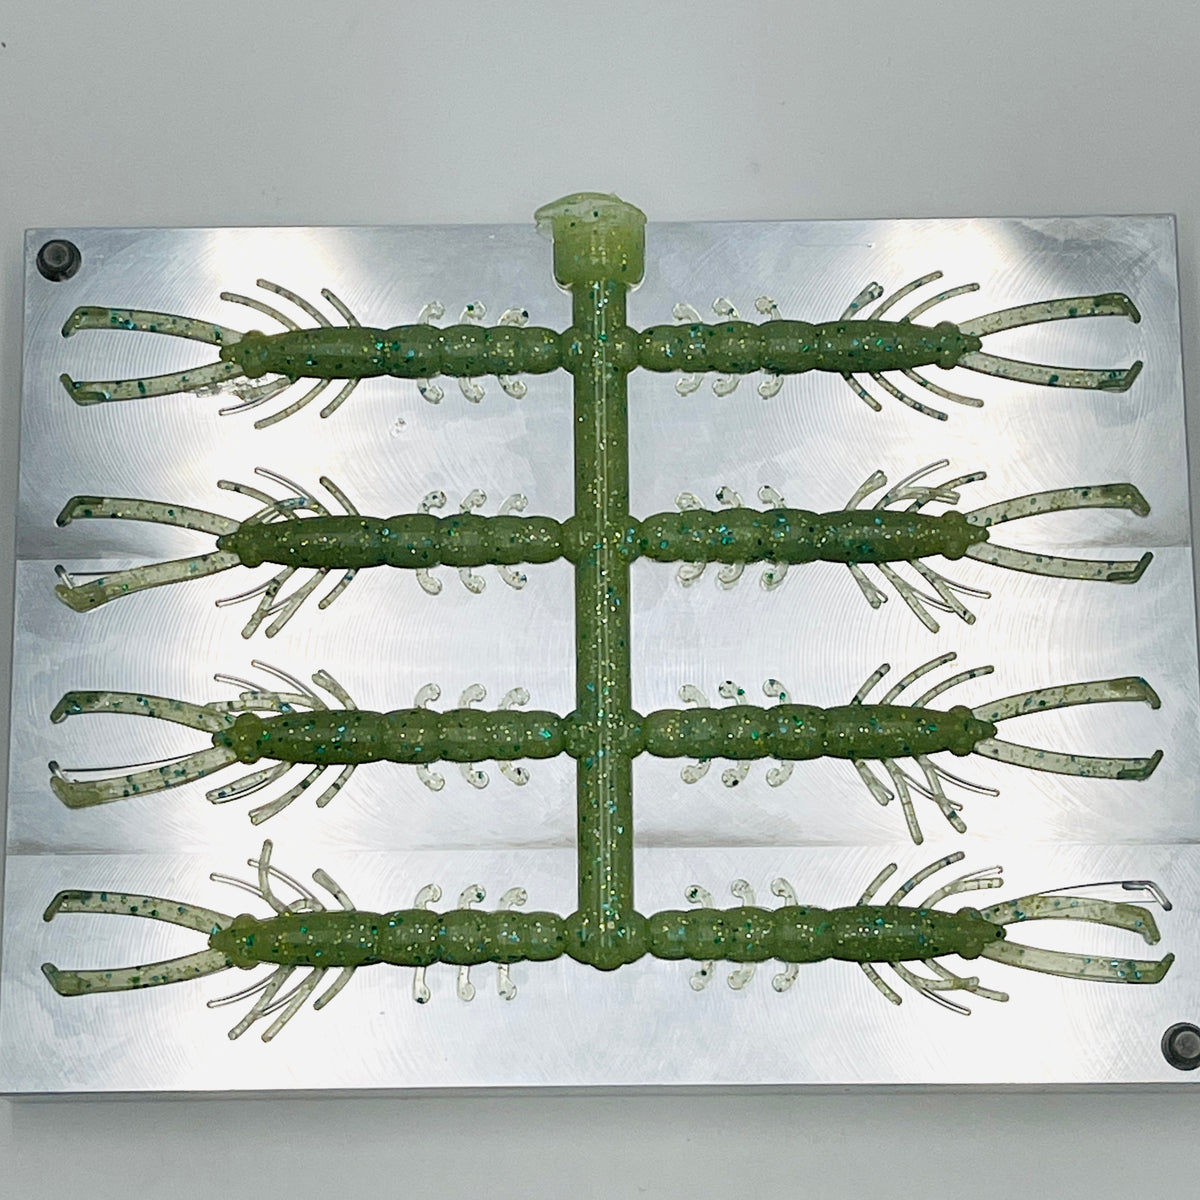 3.4 Inch Speed Shrimp Hand Injection Mold – Epic Bait Molds